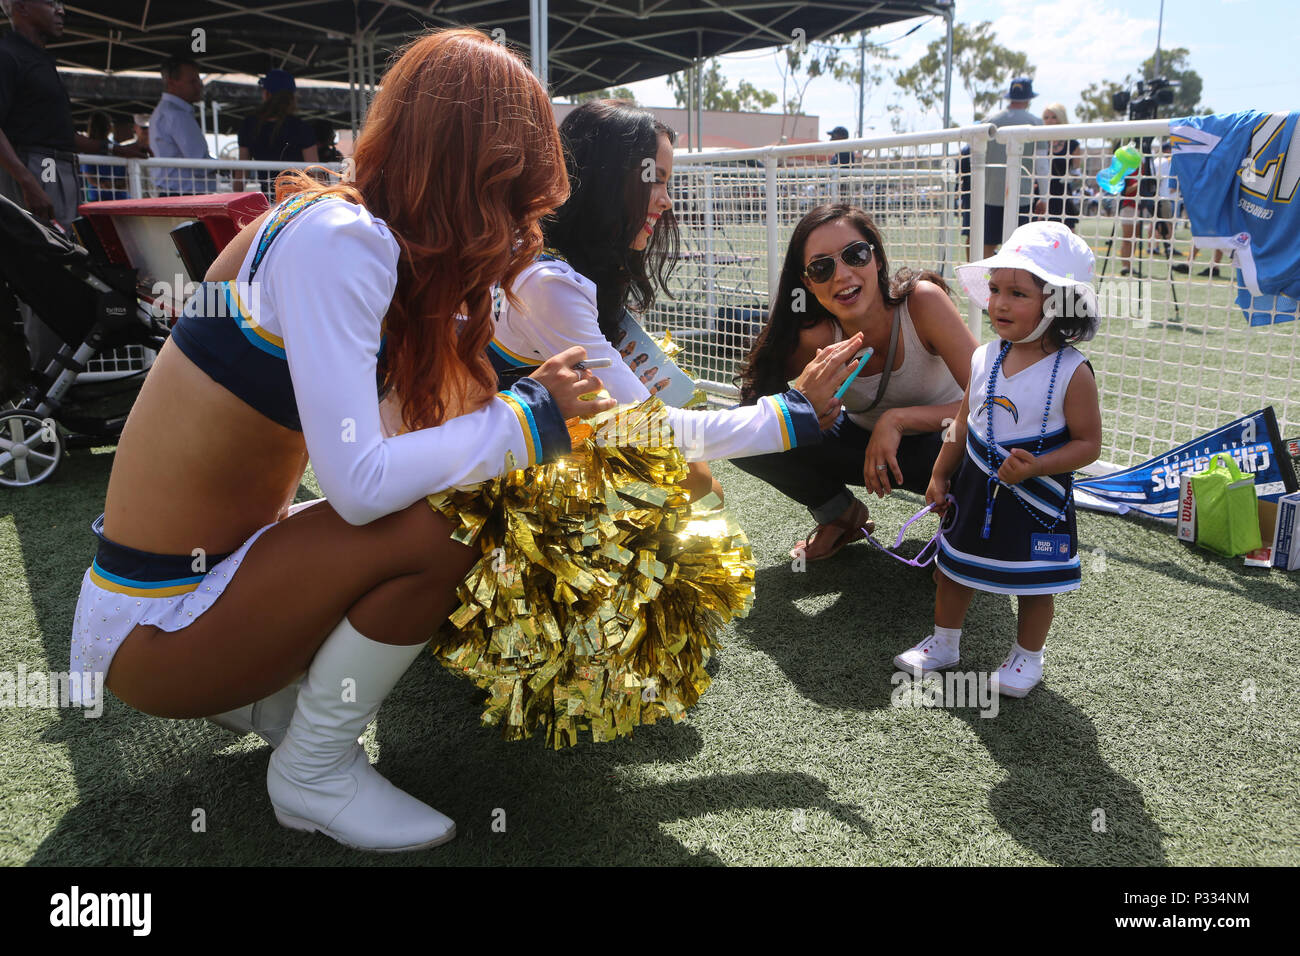 San Diego Chargers cheerleaders greet a service members family during the Chargers visit aboard MCAS Miramar, Calif., Aug. 31. While aboard the air station, the Chargers met service members and autographed various items for them. This event demonstrates the close ties between MCAS Miramar and the San Diego community. (U.S. Marine Corps photo by Lance Cpl. Harley Robinson/Released) Stock Photo